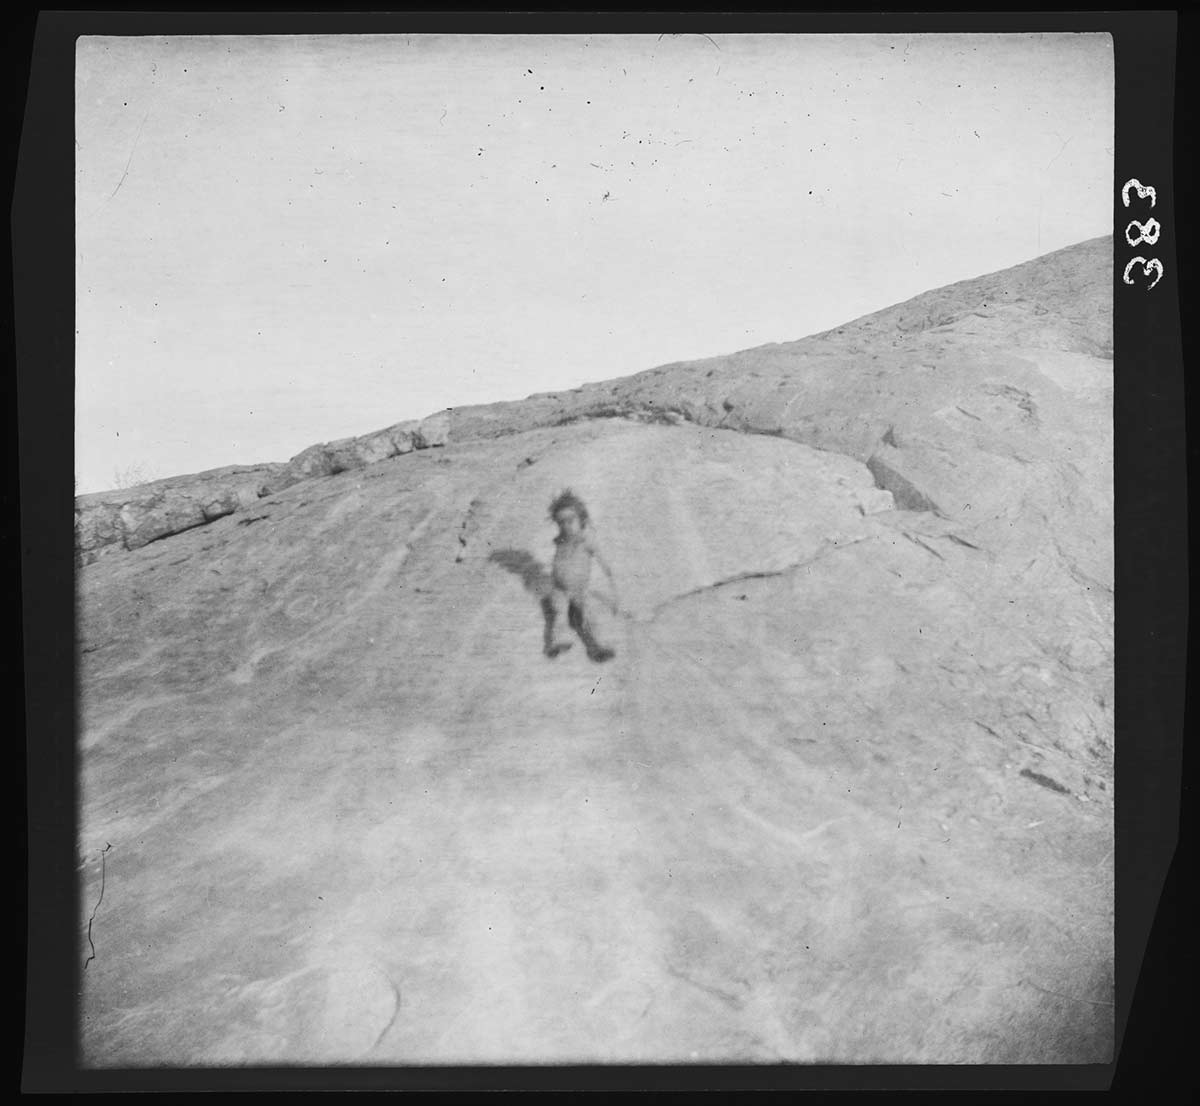 A small First Nations child tobogganing down a bare rocky slope on a seat of rushes, Kurrekapinnya Soakage, Ayers Range, Northern Territory 1903. The surface of the slope has marks that suggest that the tobogganing was a frequent game. The child is in the middle of the image; behind is more rock leading up to a large slope that rises up from left to right in the image. - click to view larger image